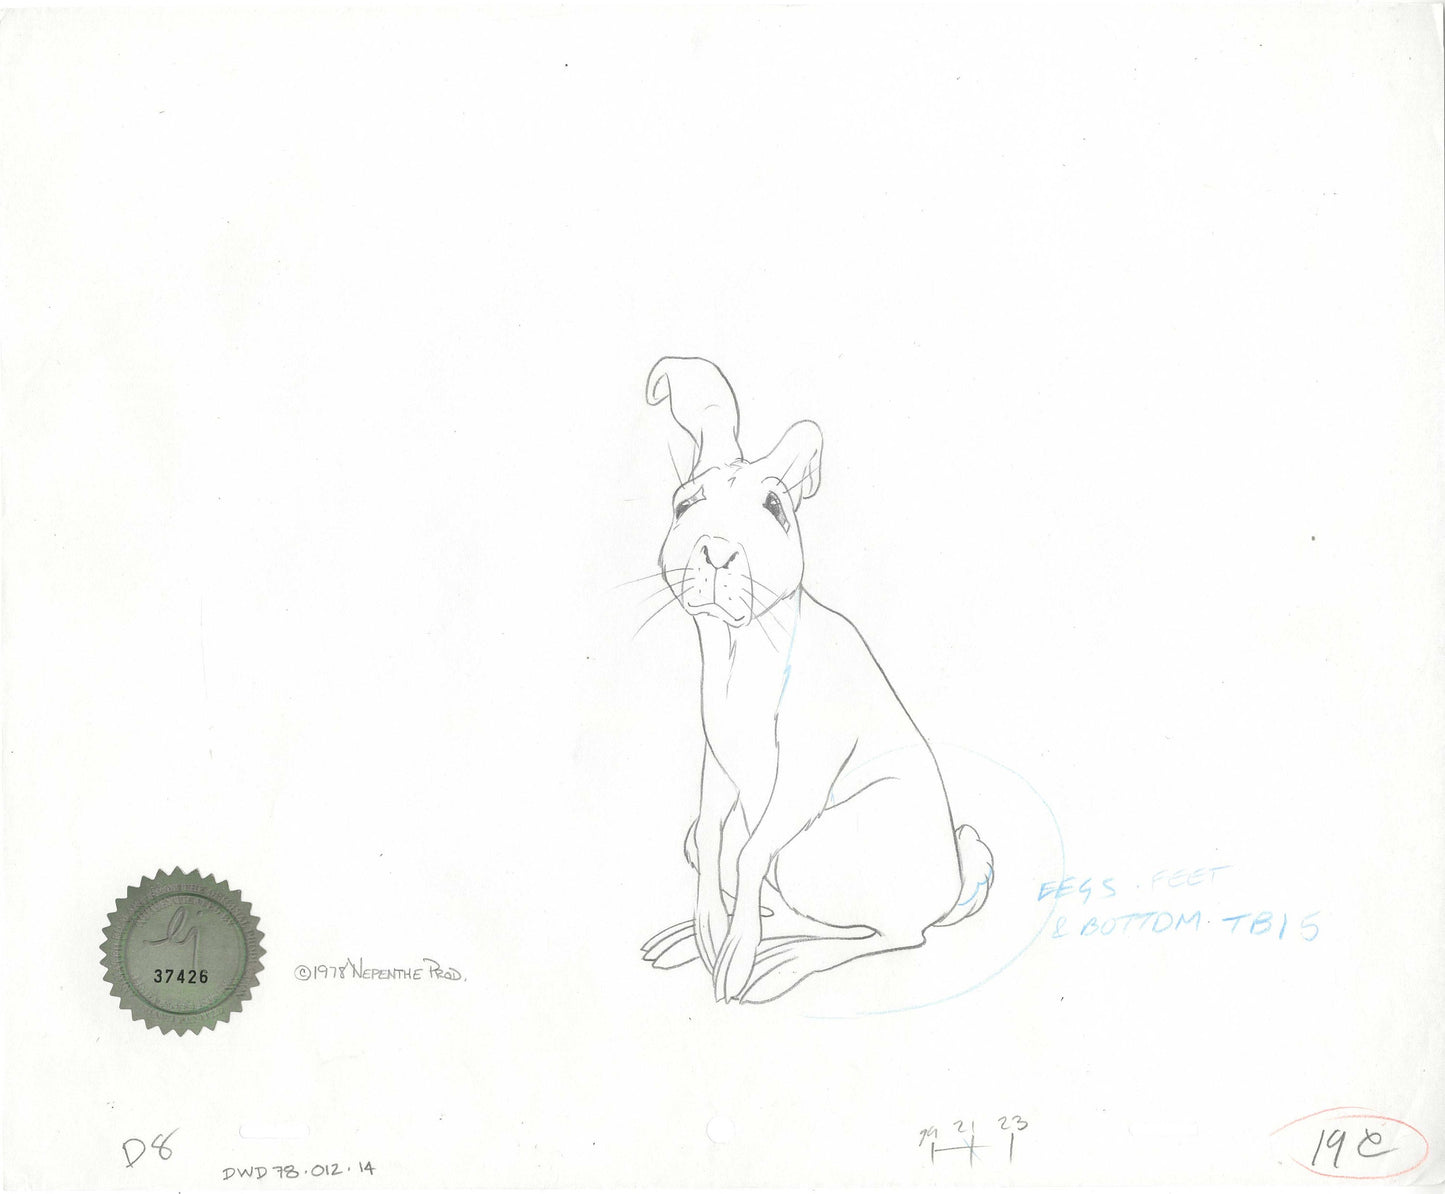 Watership Down 1978 Production Animation Cel Drawing of Cowslip with Linda Jones Enterprise Seal and Certificate of Authenticity 012-014